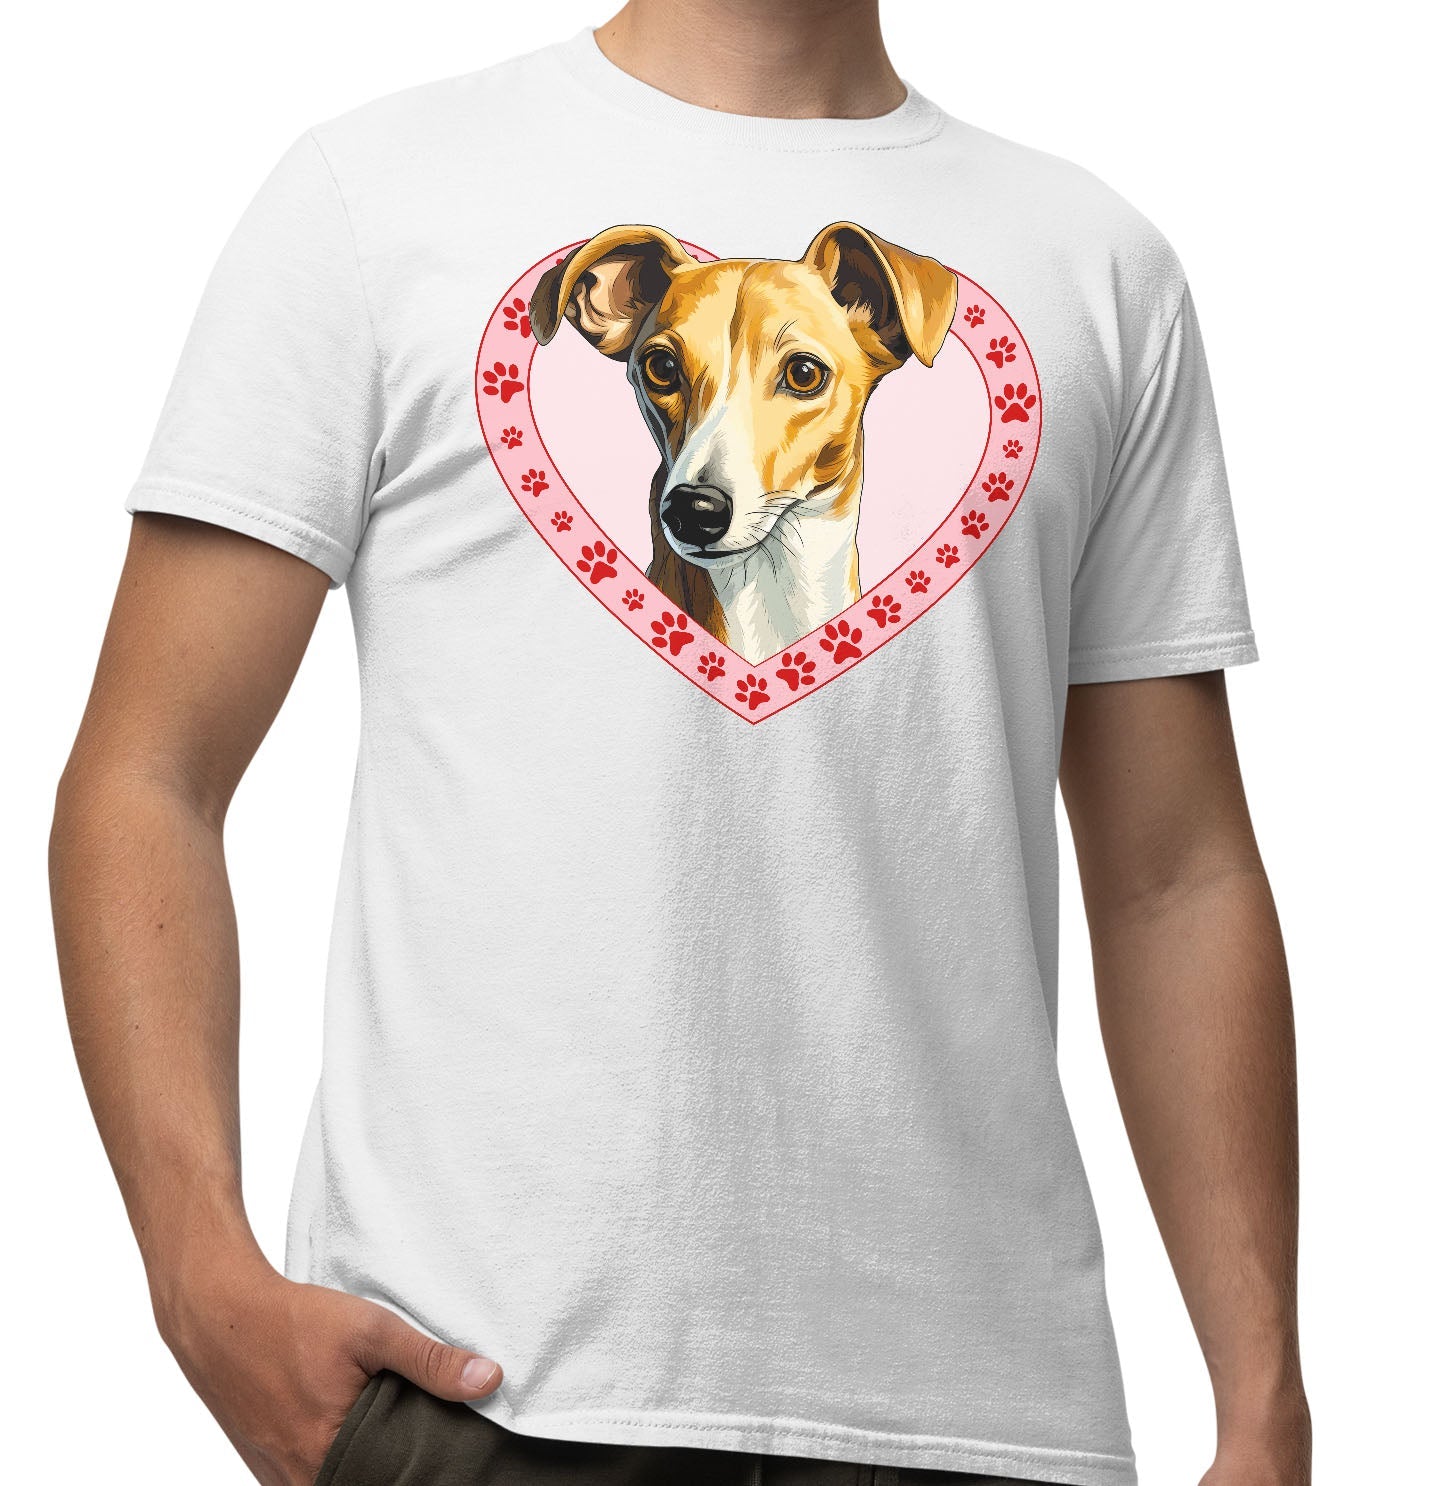 Greyhound (Fawn & White) Illustration In Heart - Adult Unisex T-Shirt